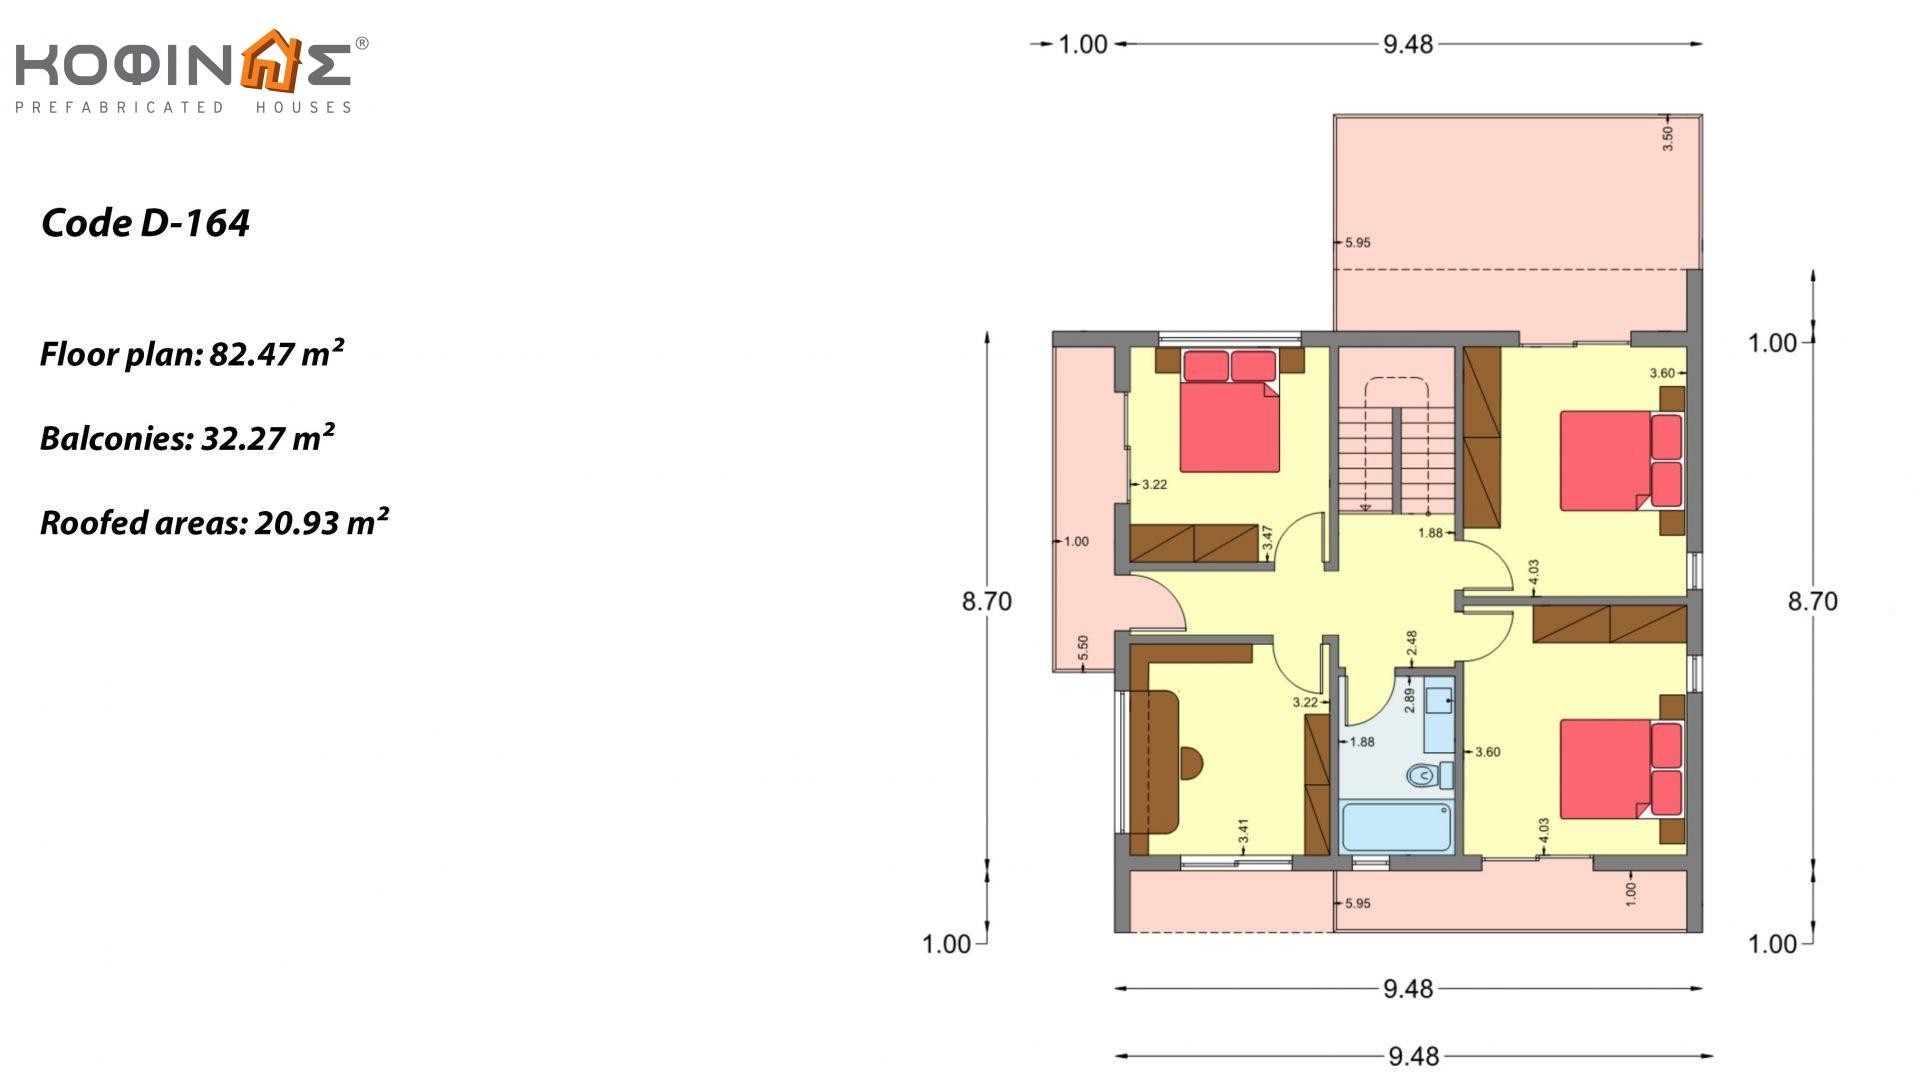 2-story house D-164, total surface of 164.94 m² ,+Garage 20.82 m²(=185.76 m²), roofed areas 32.38 m²,balconies 32.27 m²